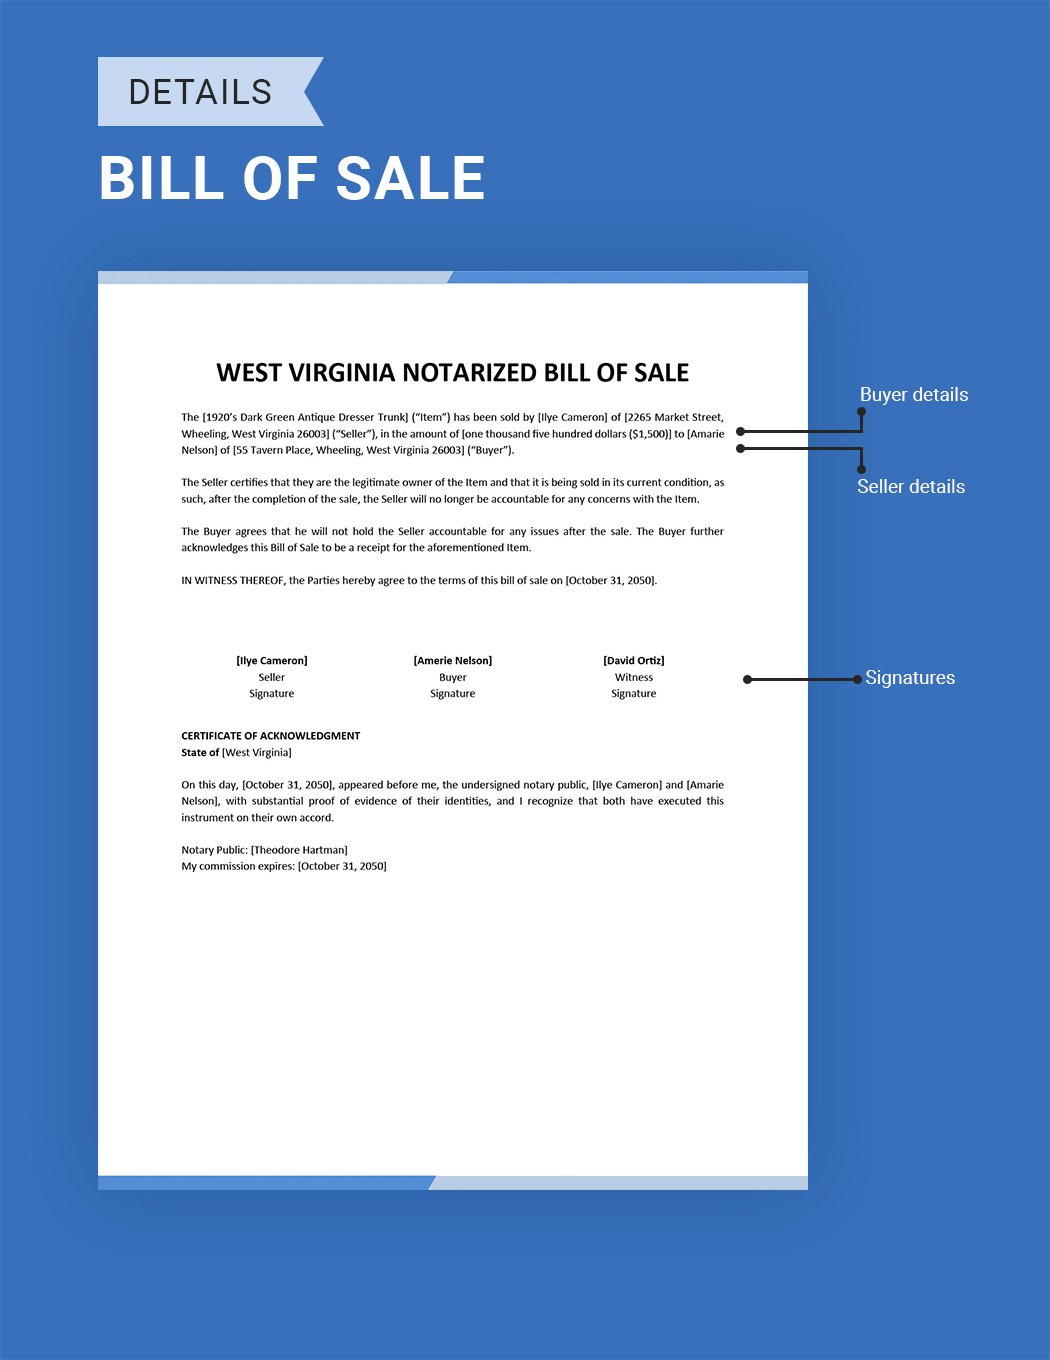 West Virginia Notarized Bill of Sale Template